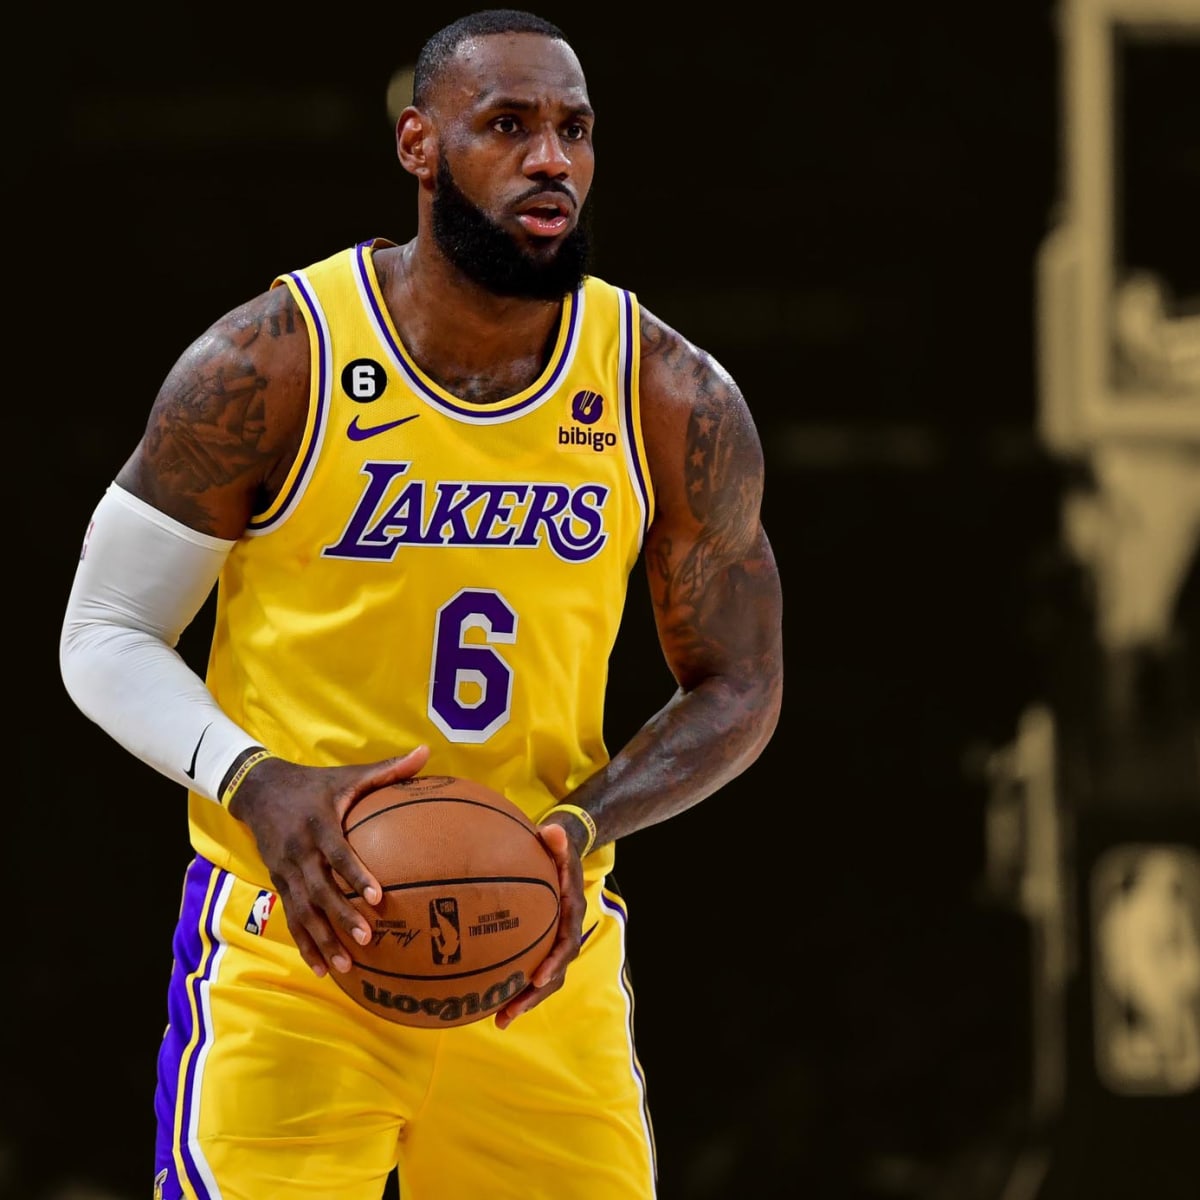 Lakers' LeBron James is finally old